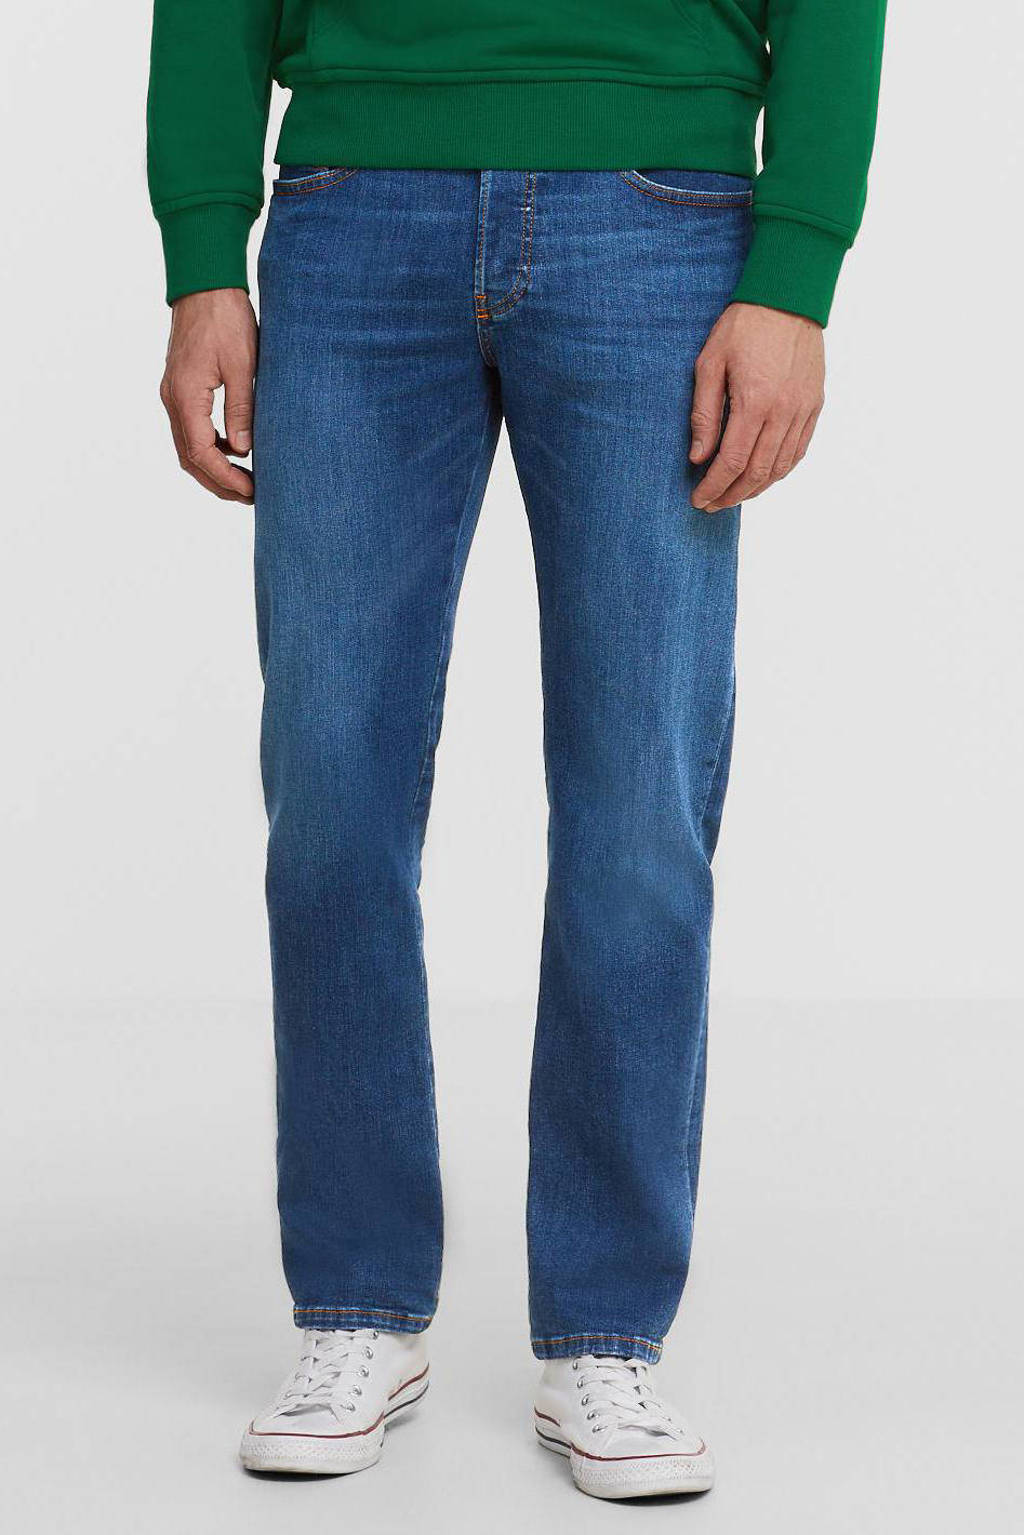 Diesel straight fit jeans D-MIHTRY 01 blauw